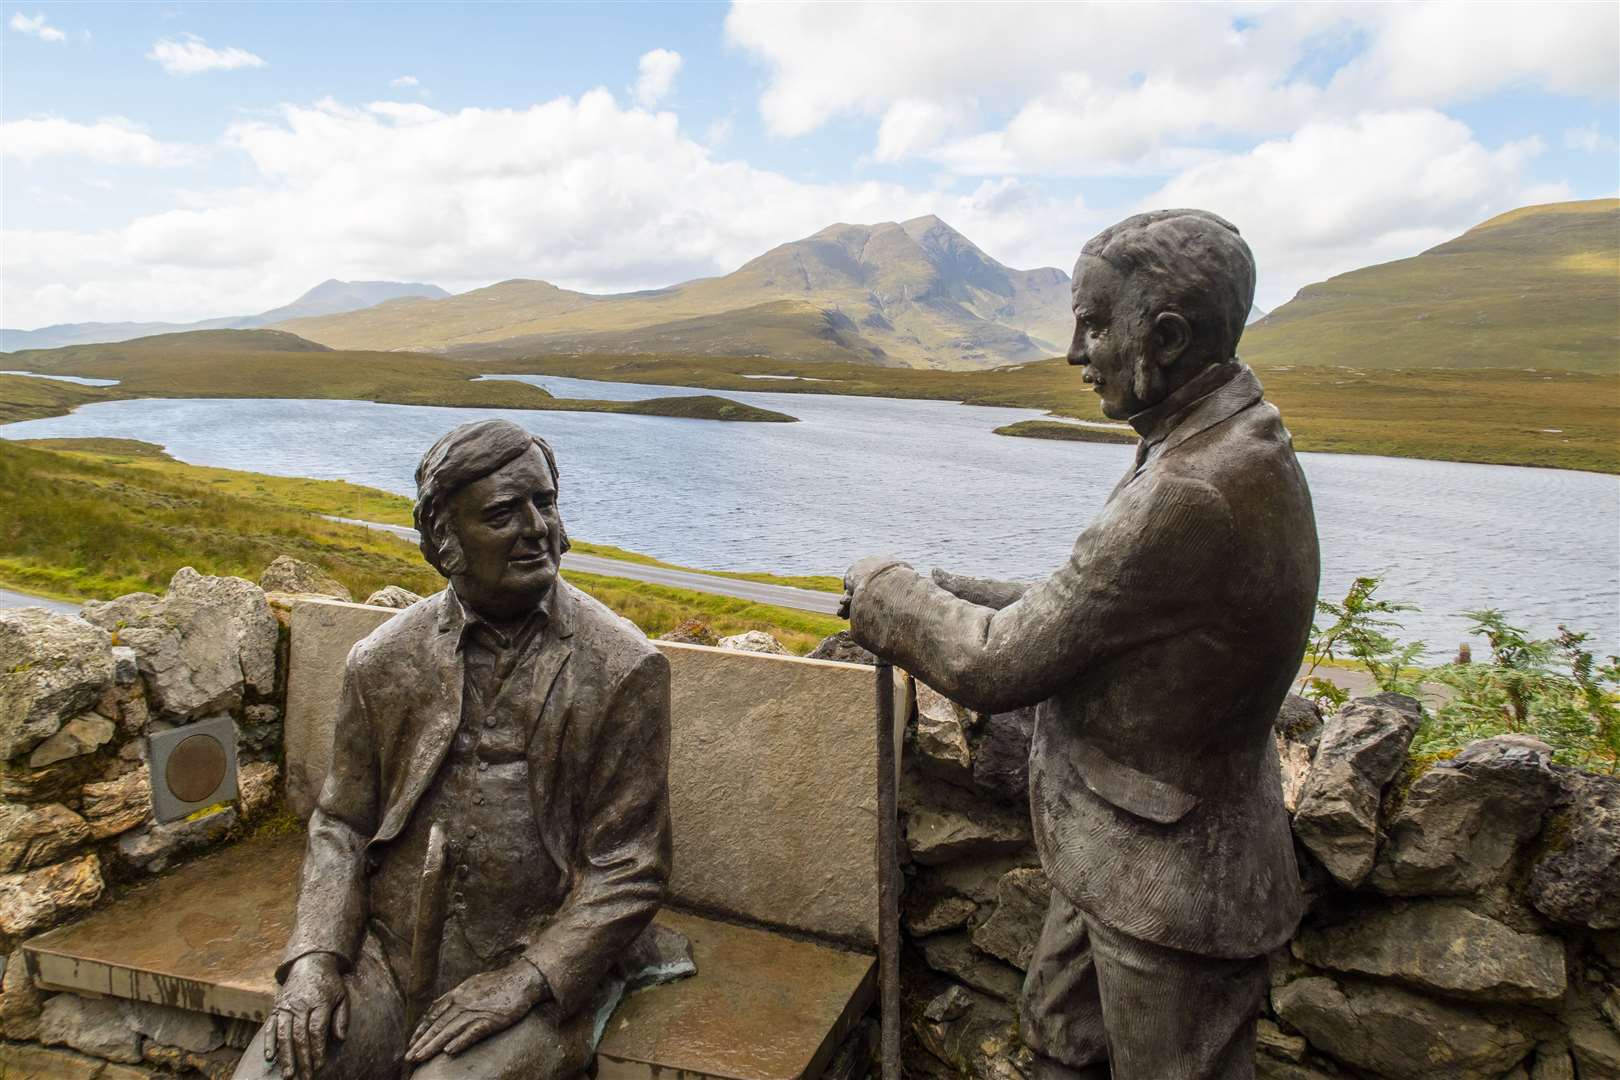 Statues of the geologists Benjamin Peach and John Horne at hiking trail at Knockan Crag in North West Highlands Geopark, Scotland.